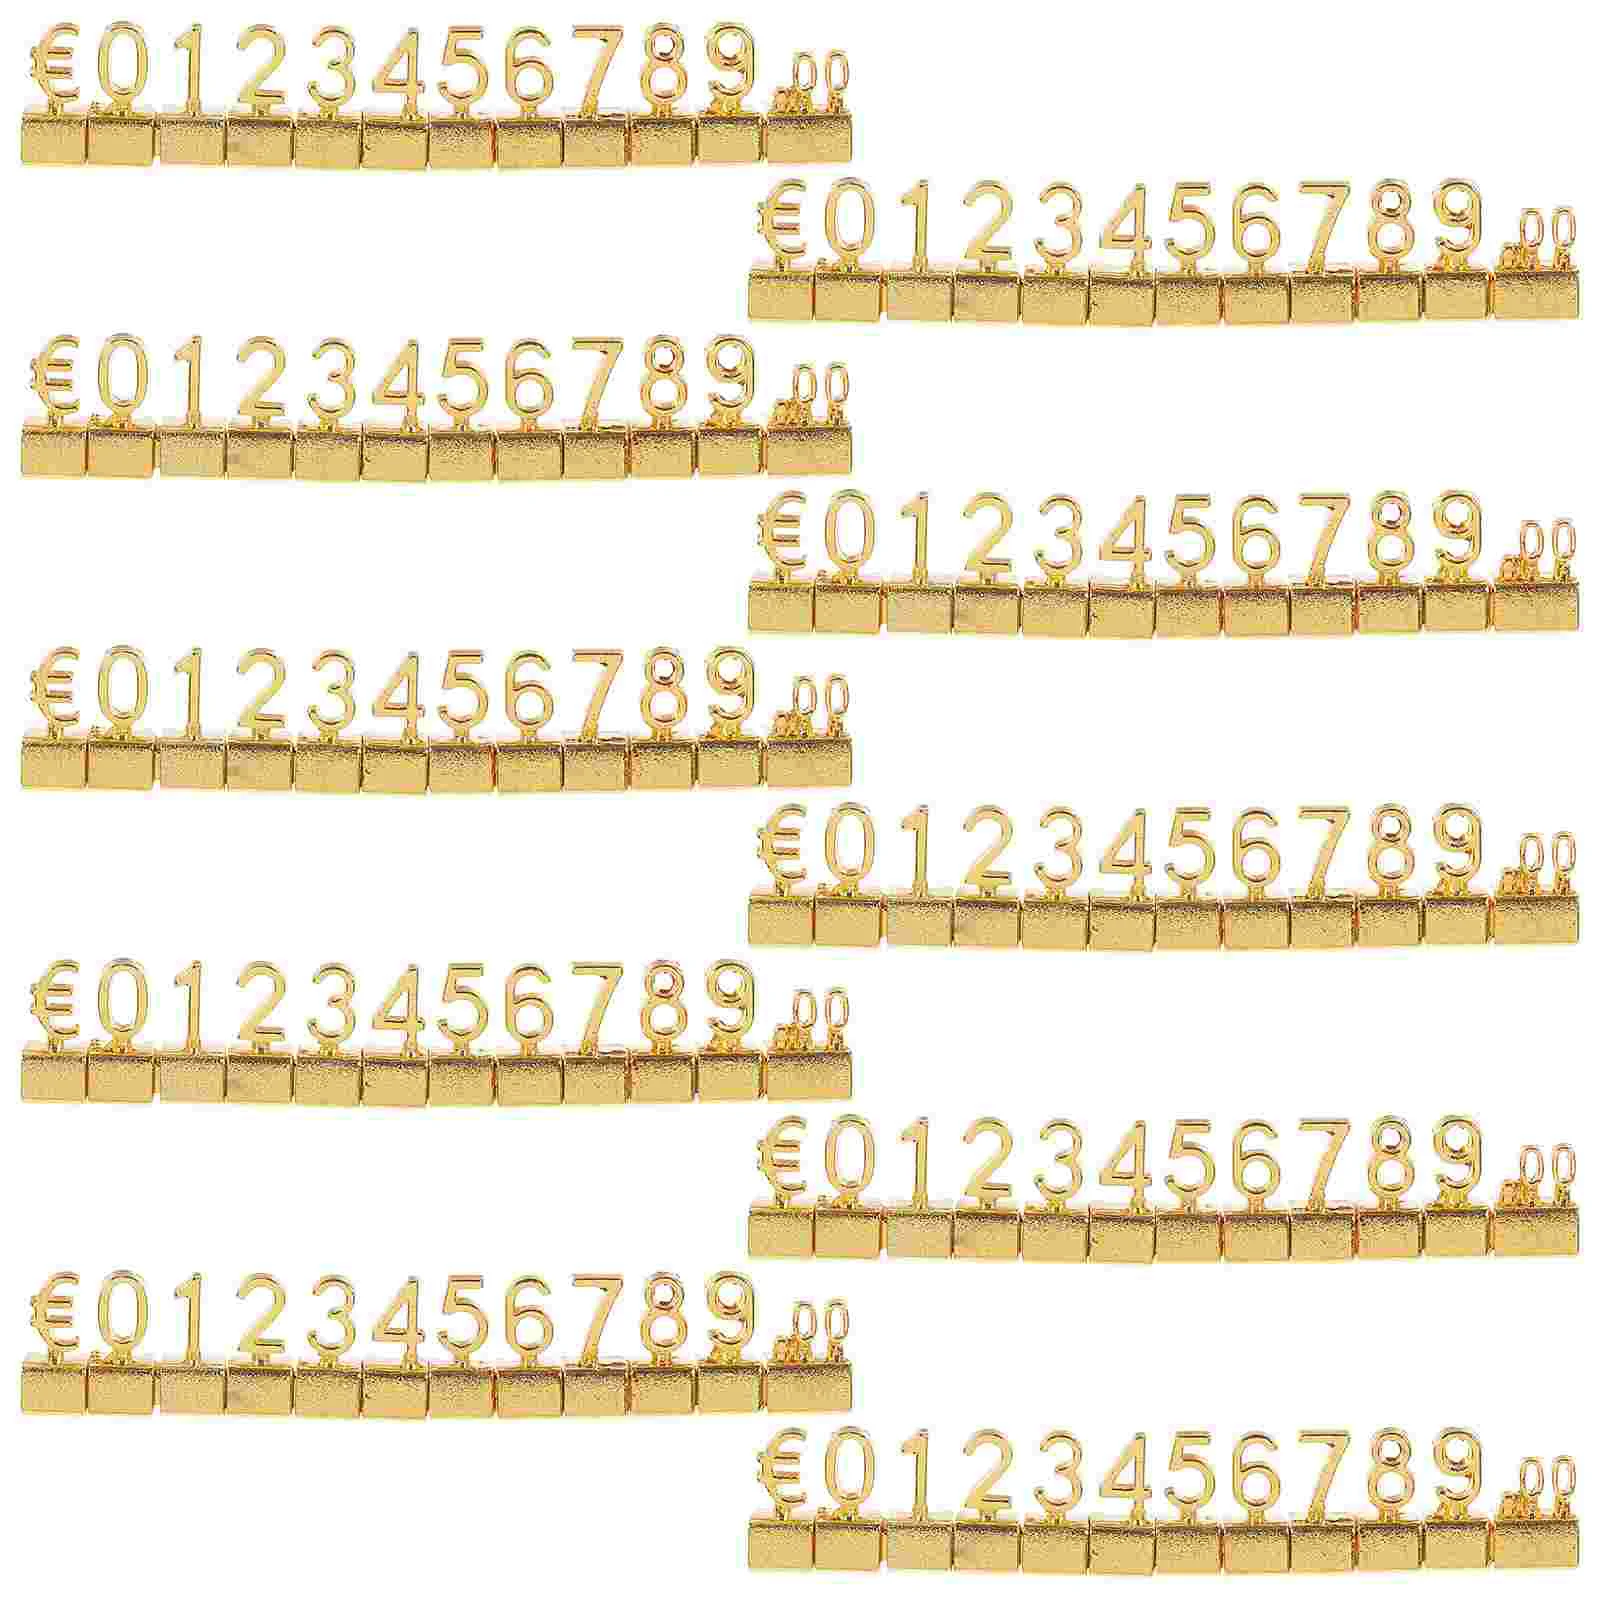 

10 Pcs Metal Price Tag Adjustable Block Arabic Gold Jewlery Jewelry Display Cubes Letter Pricing Label Alloy Merchandise Tags